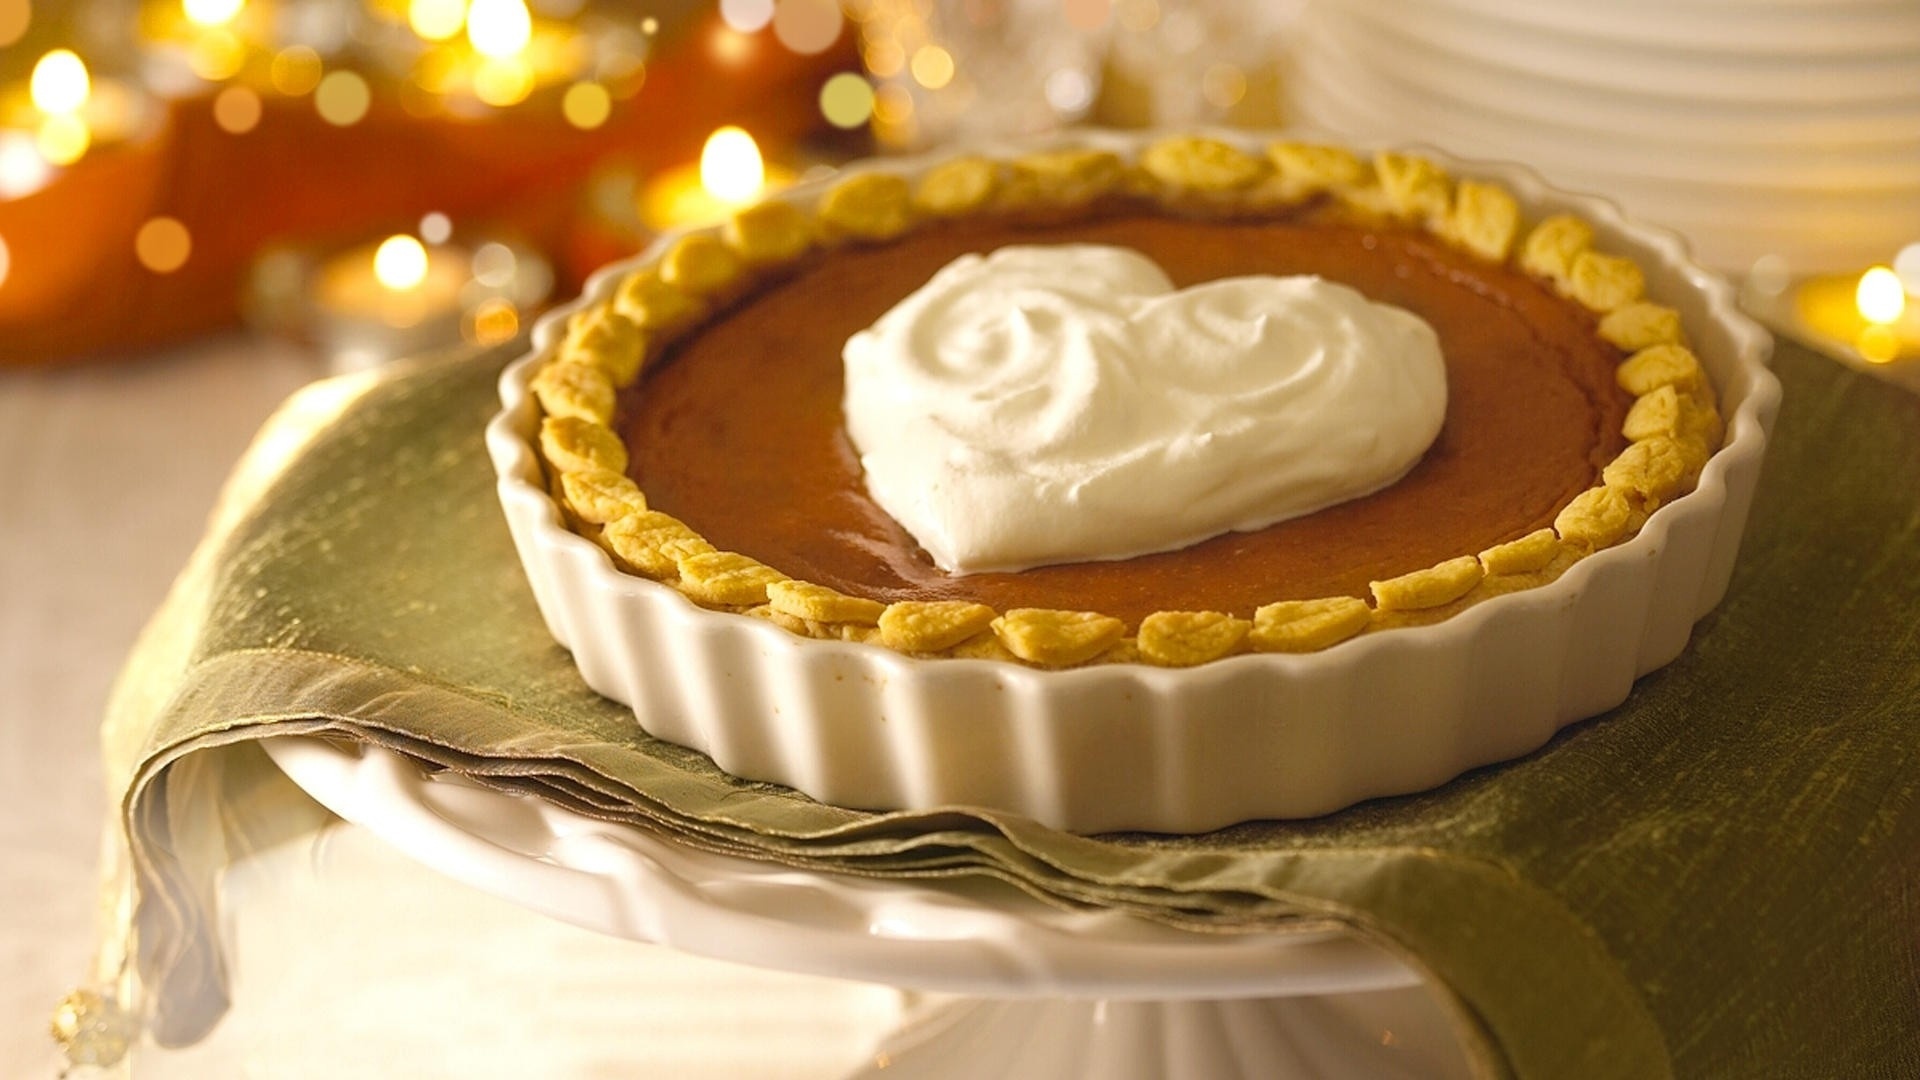 Pie: Has a bottom crust, Used for custard or cream-based fillings. 1920x1080 Full HD Wallpaper.